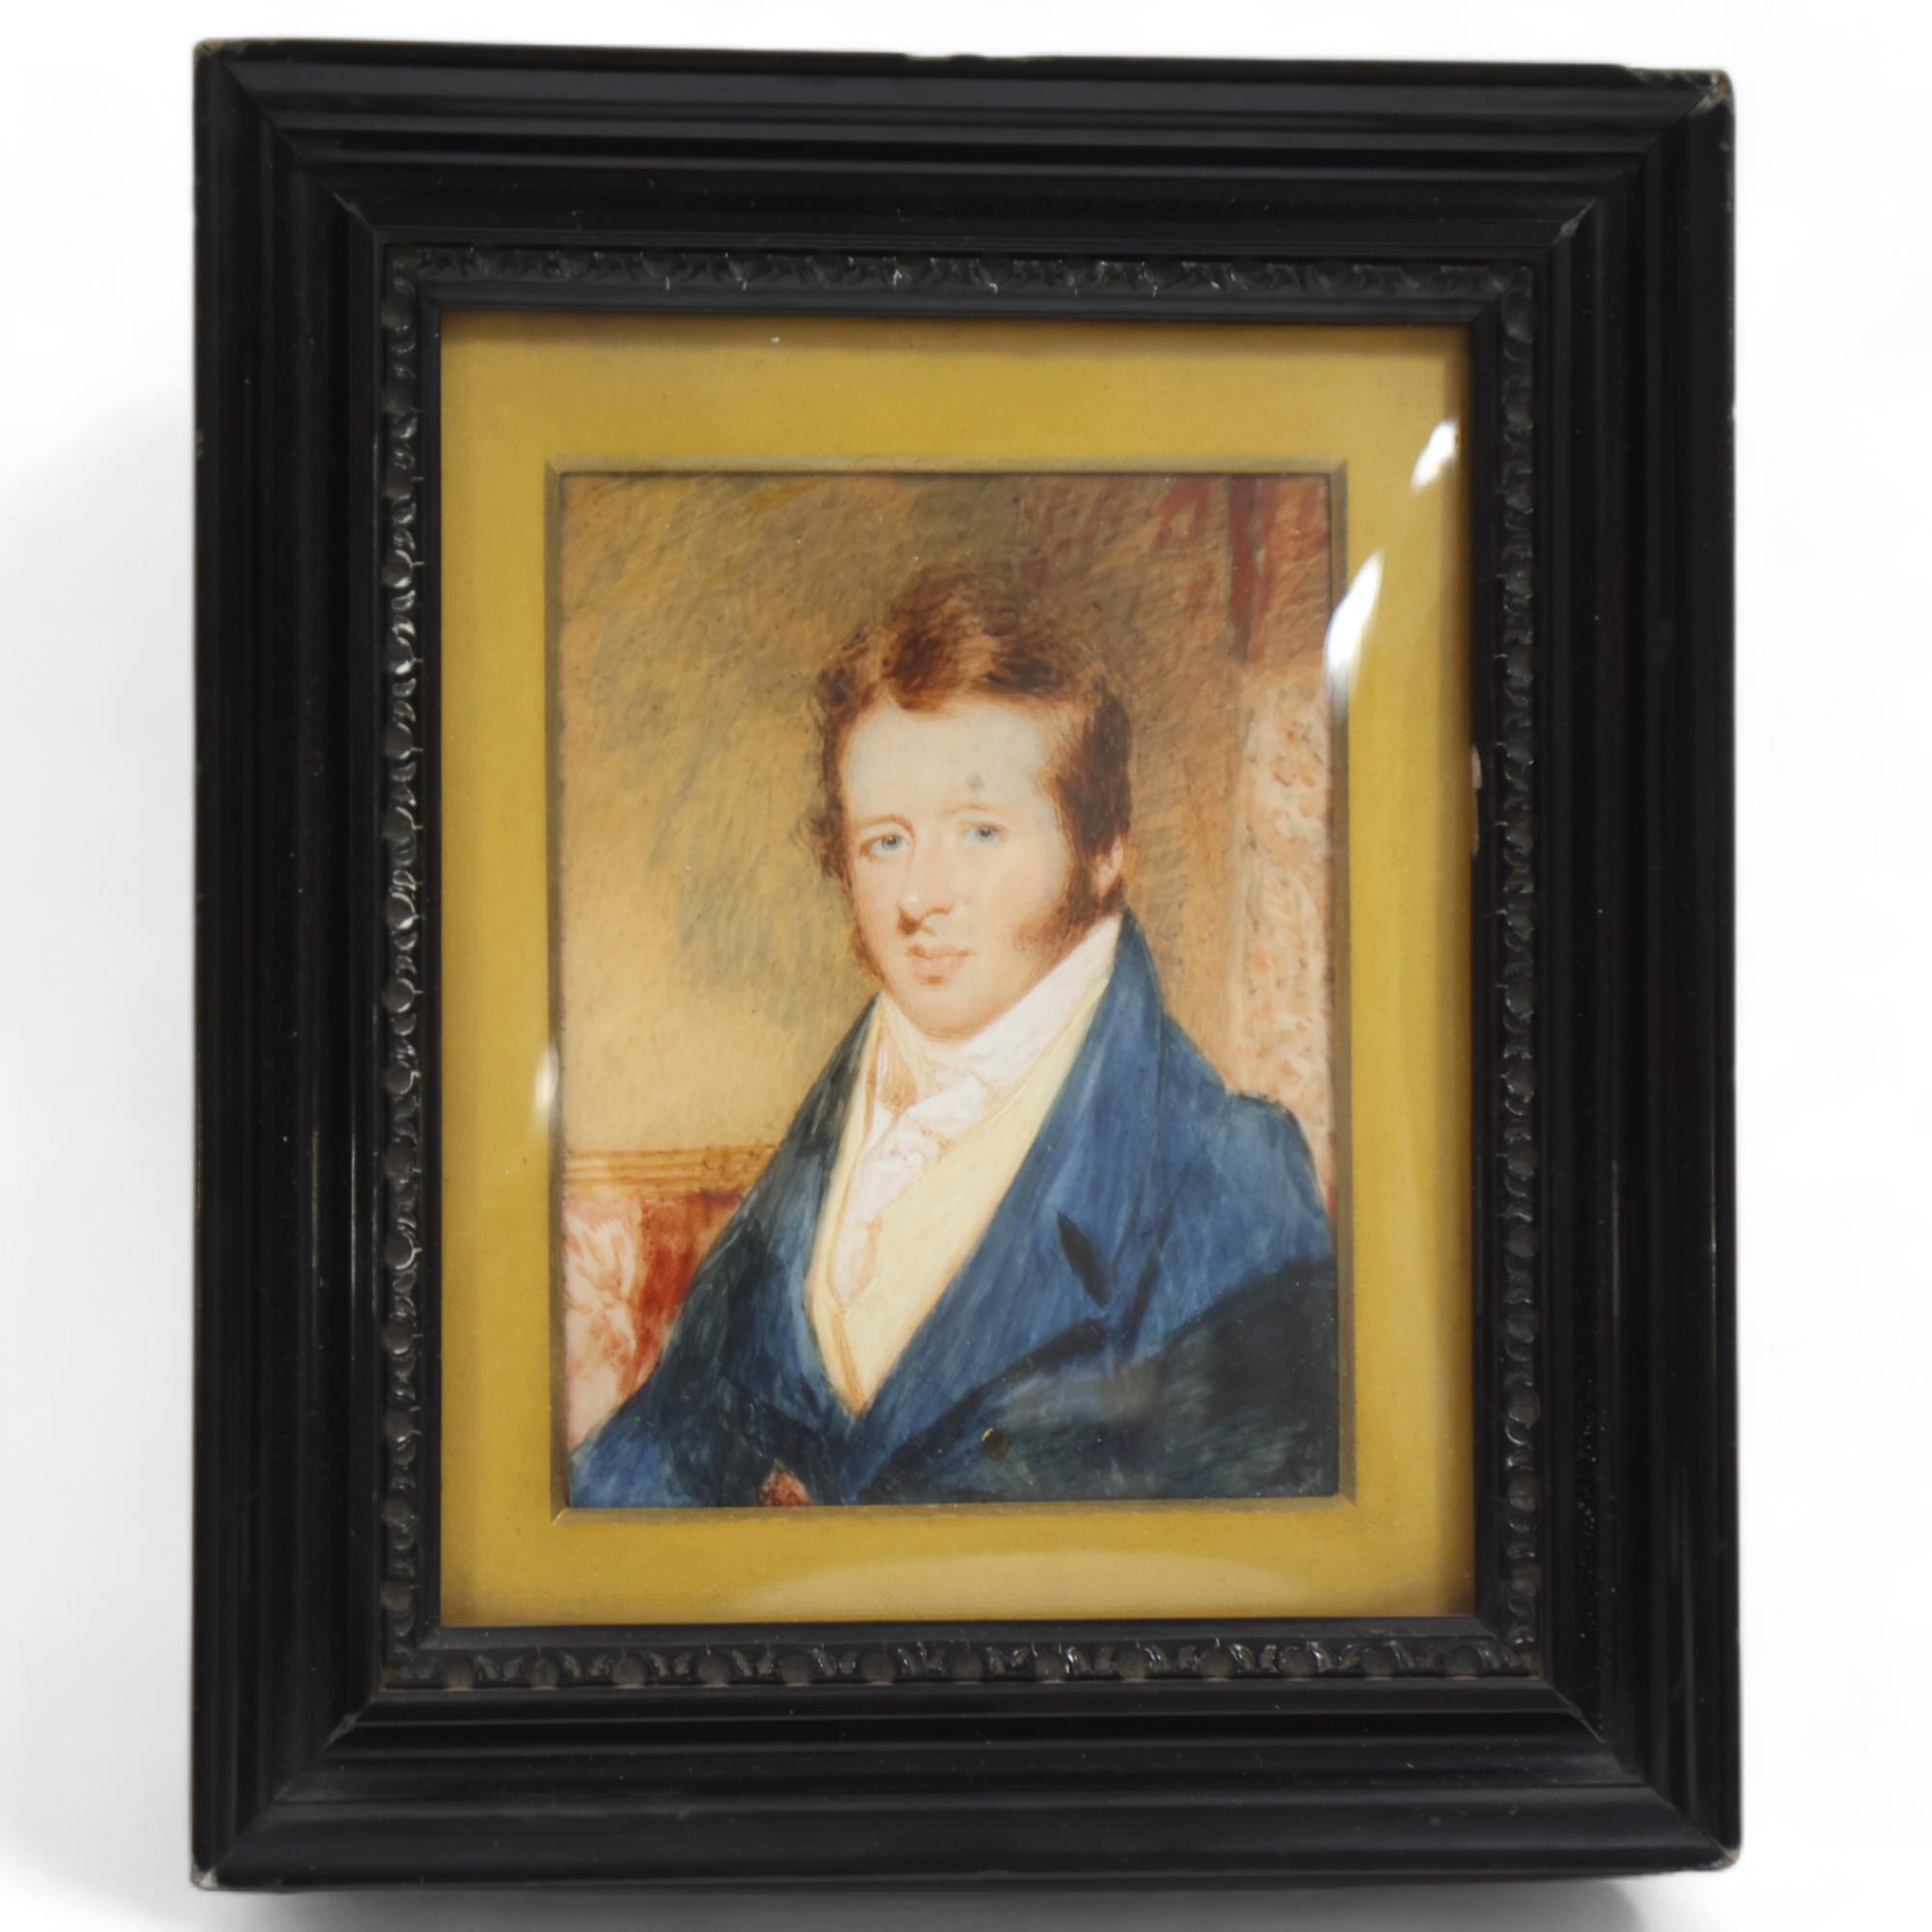 Miniature portrait of a gentleman wearing a blue coat, watercolour on ivorine, early 19th century,